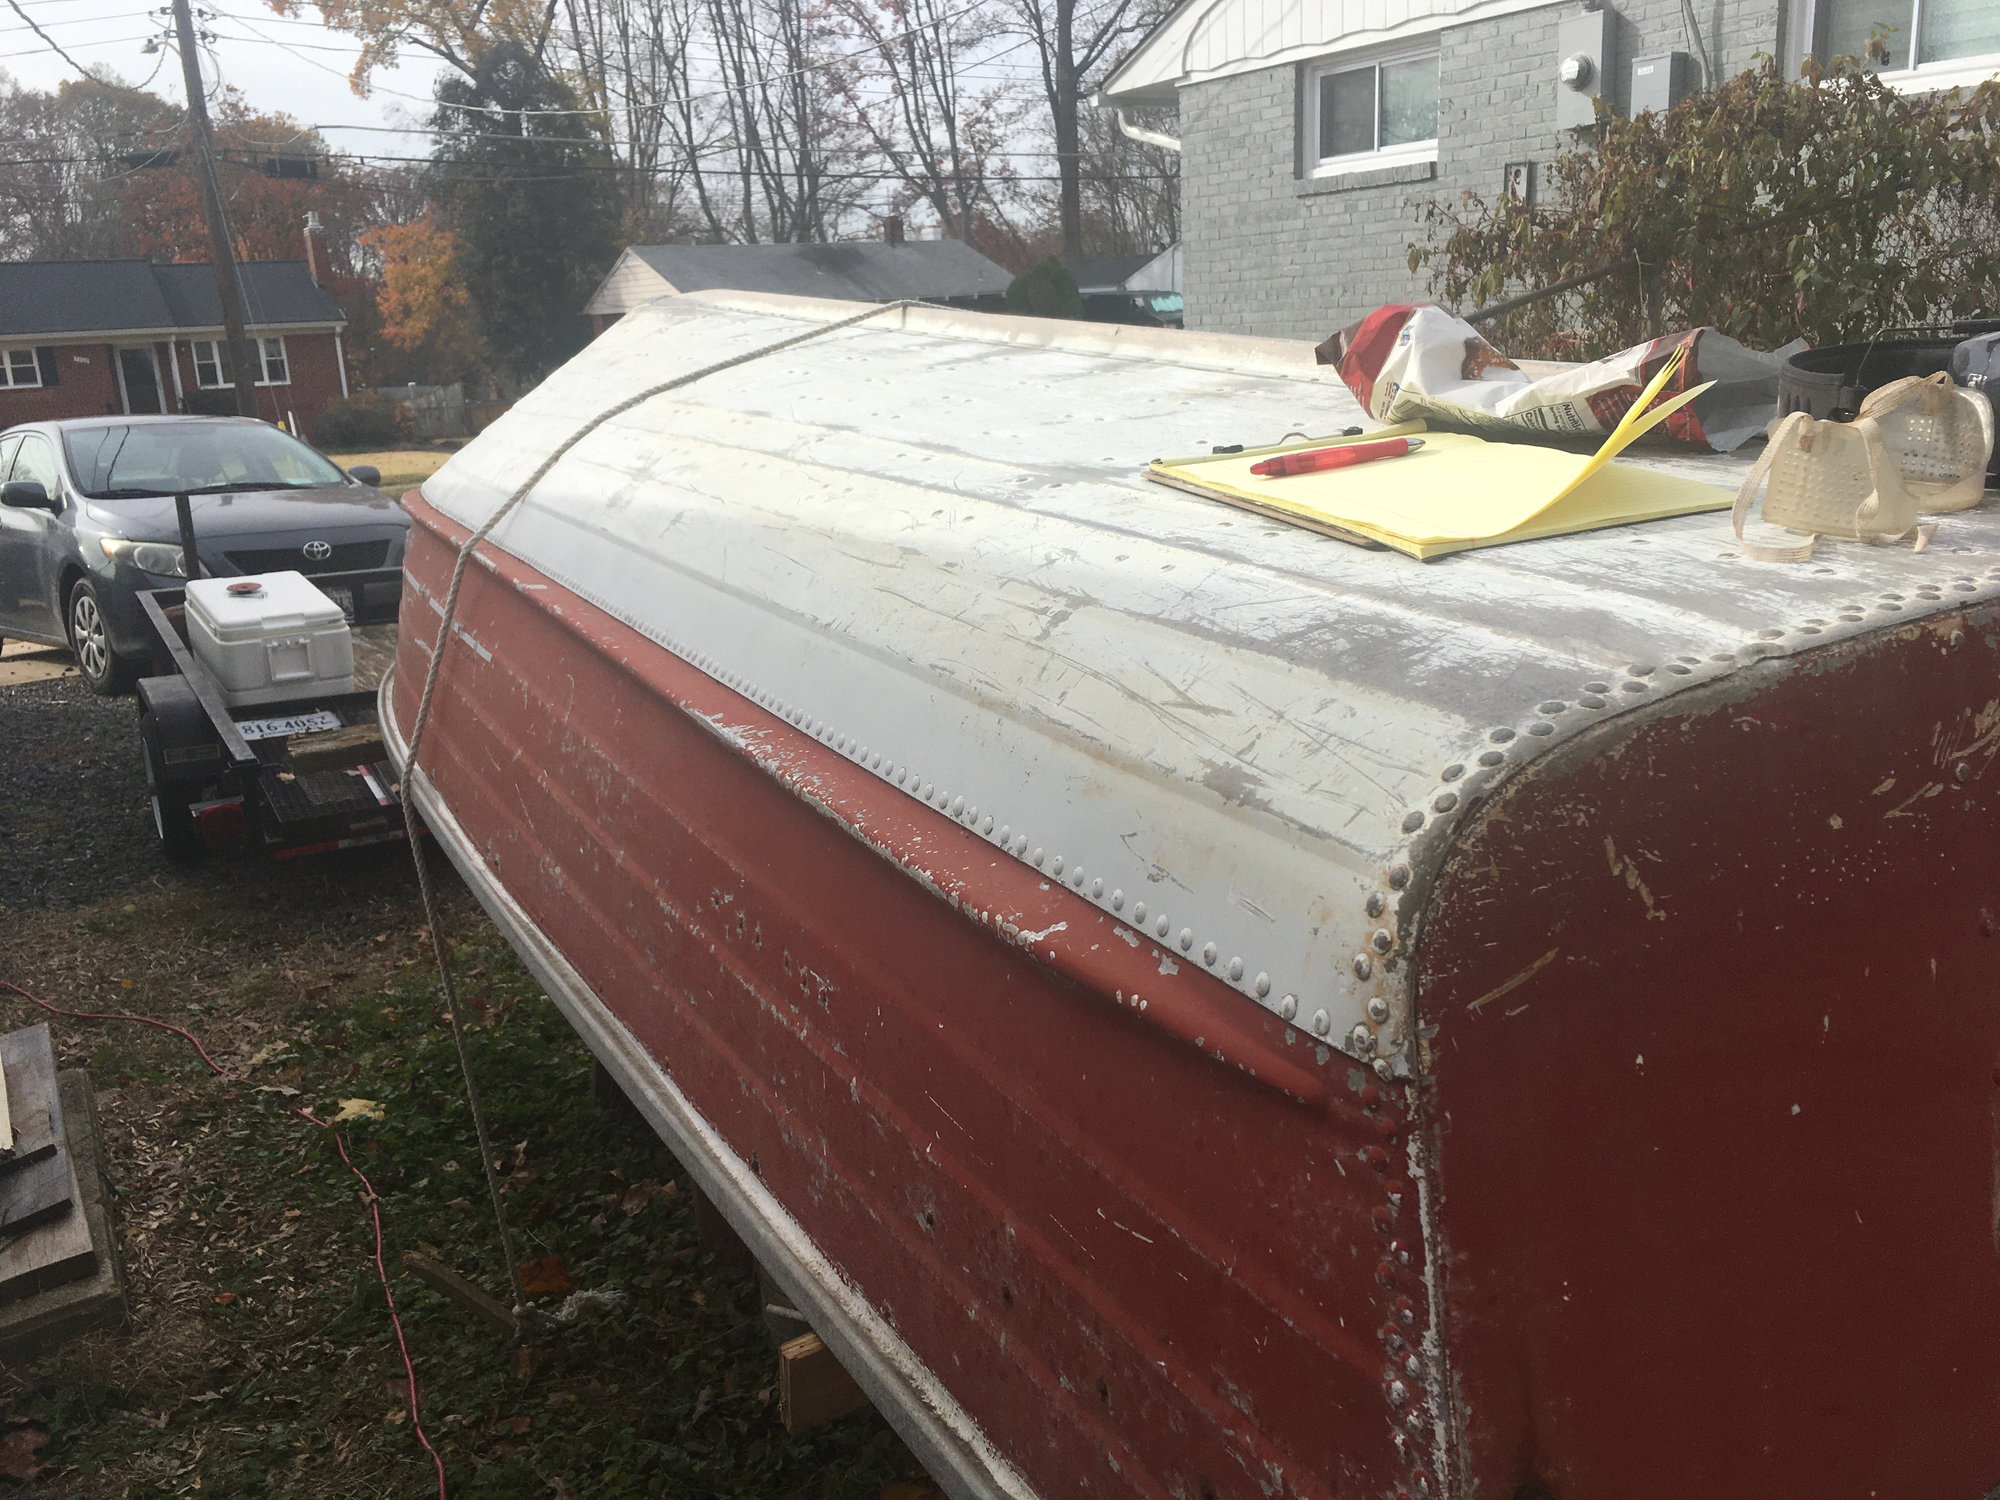 Bought my 1974 Starcraft 14ft deep v as a project boat. Could not